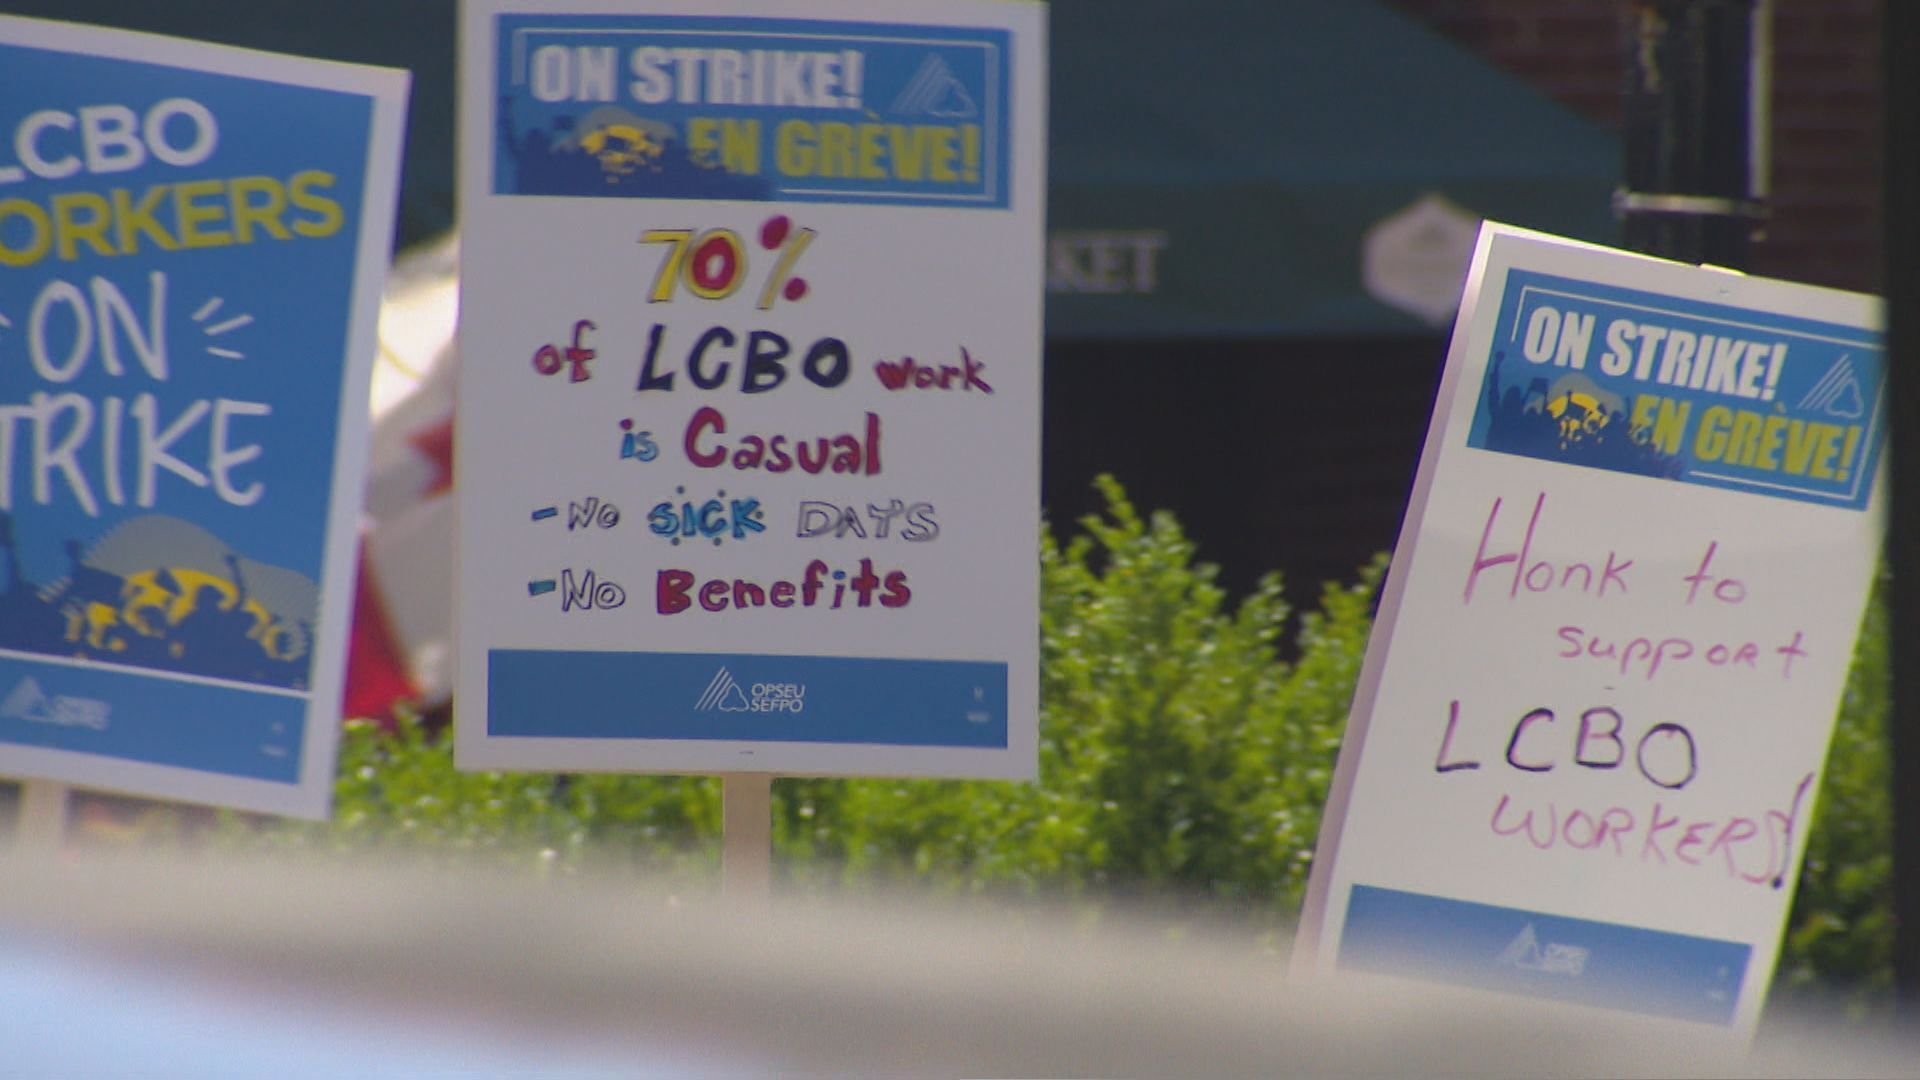 LCBO workers officially on strike, forcing almost 700 stores to close